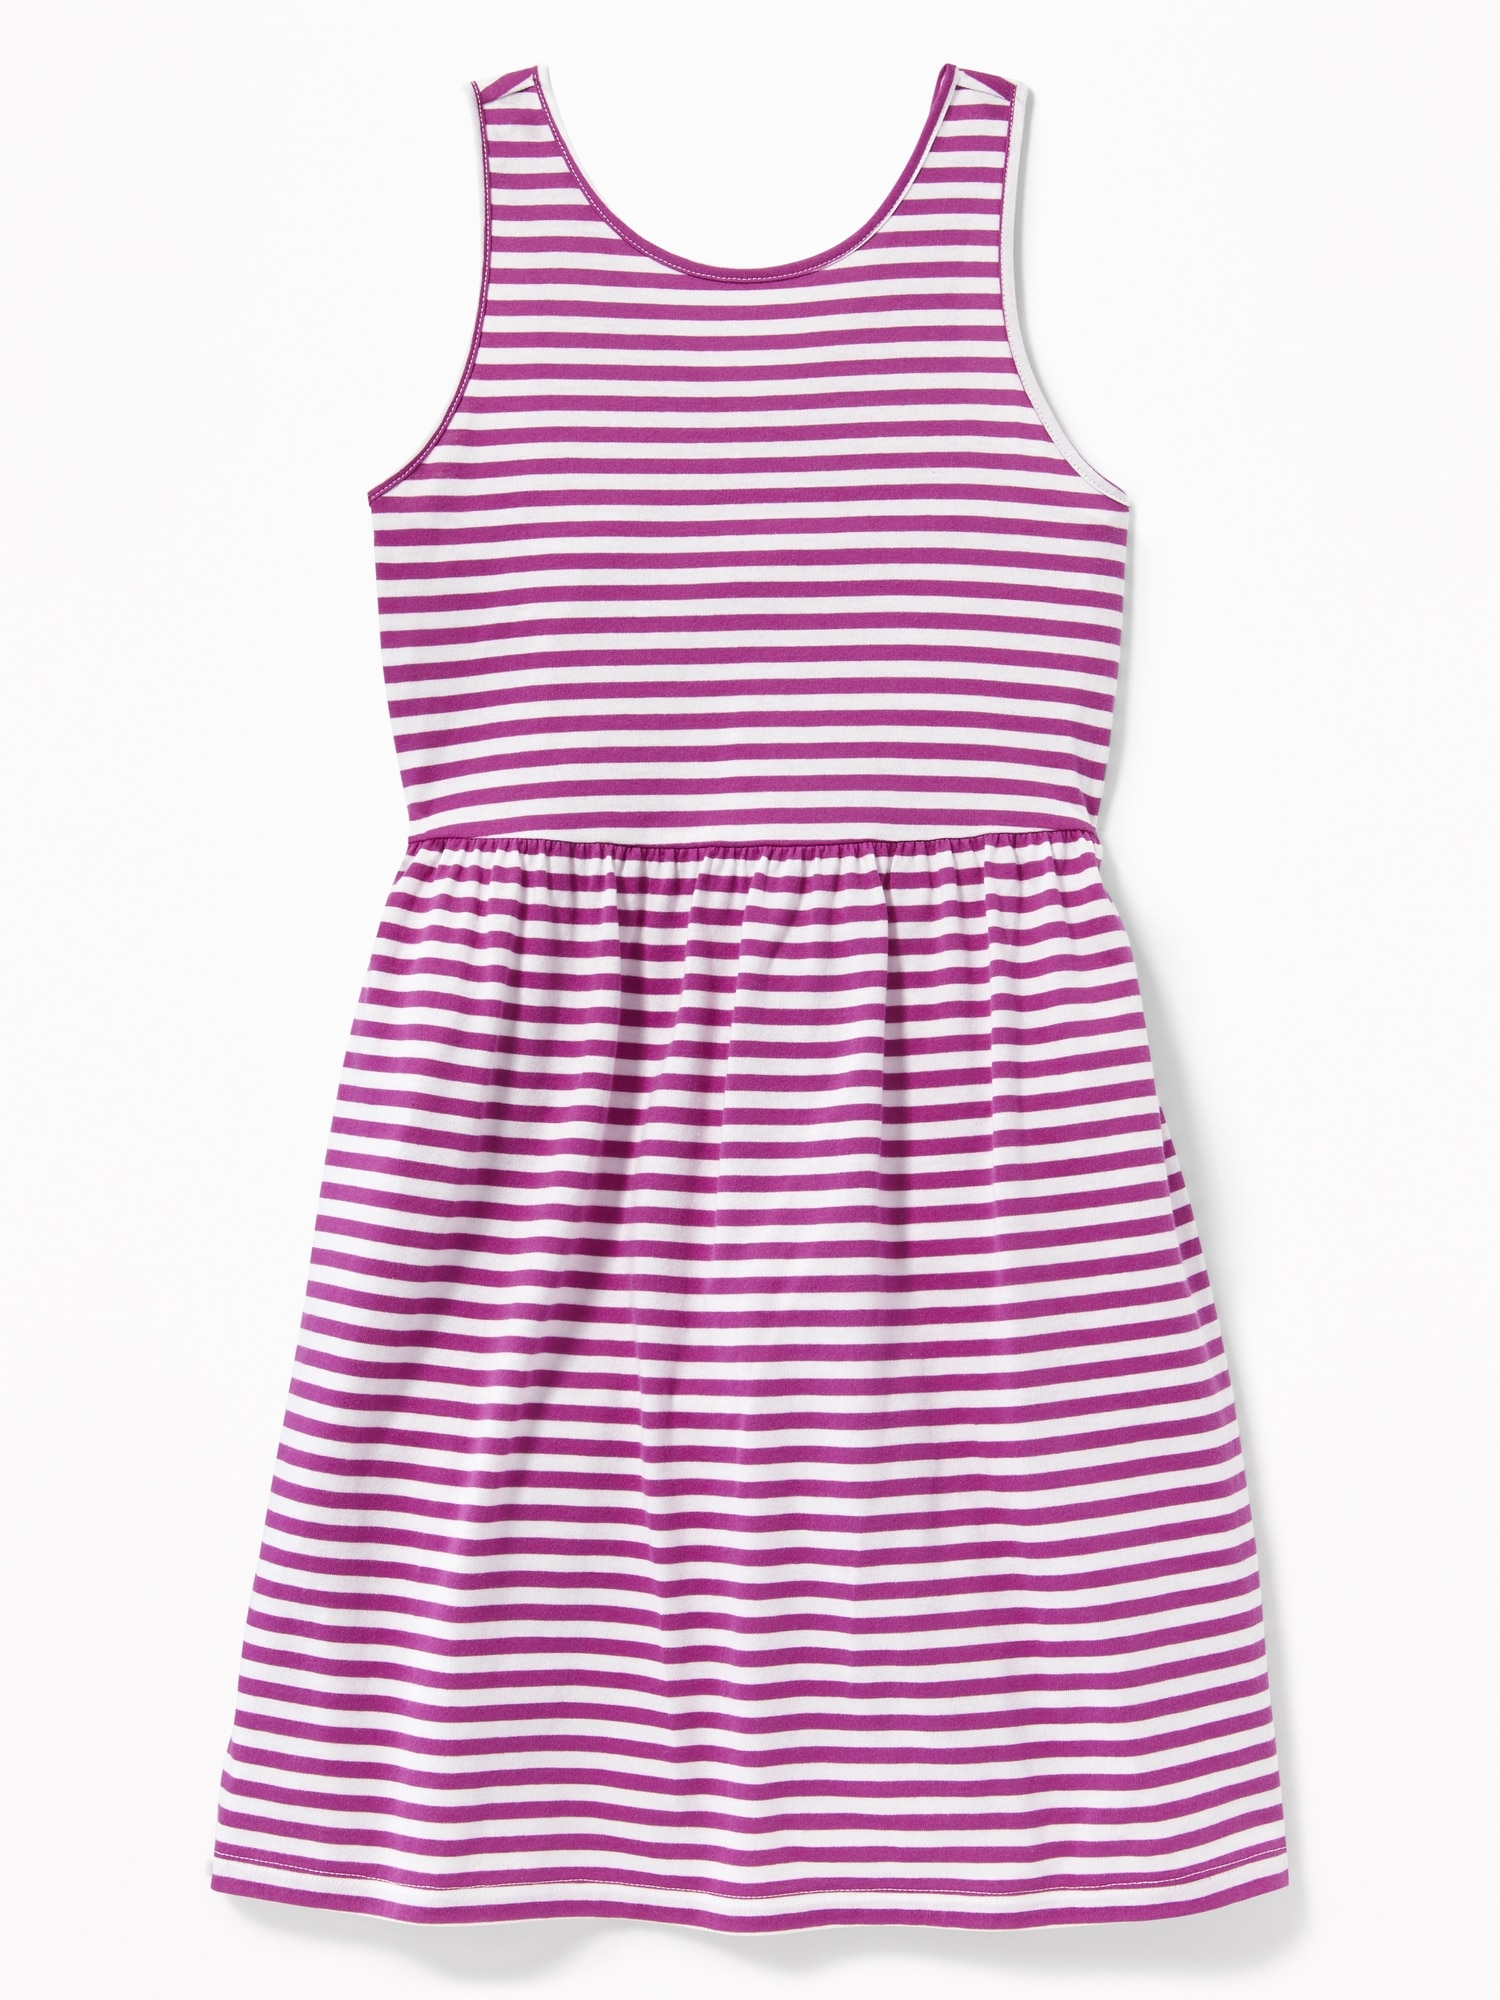 Patterned Jersey Fit & Flare Tank Dress for Girls | Old Navy